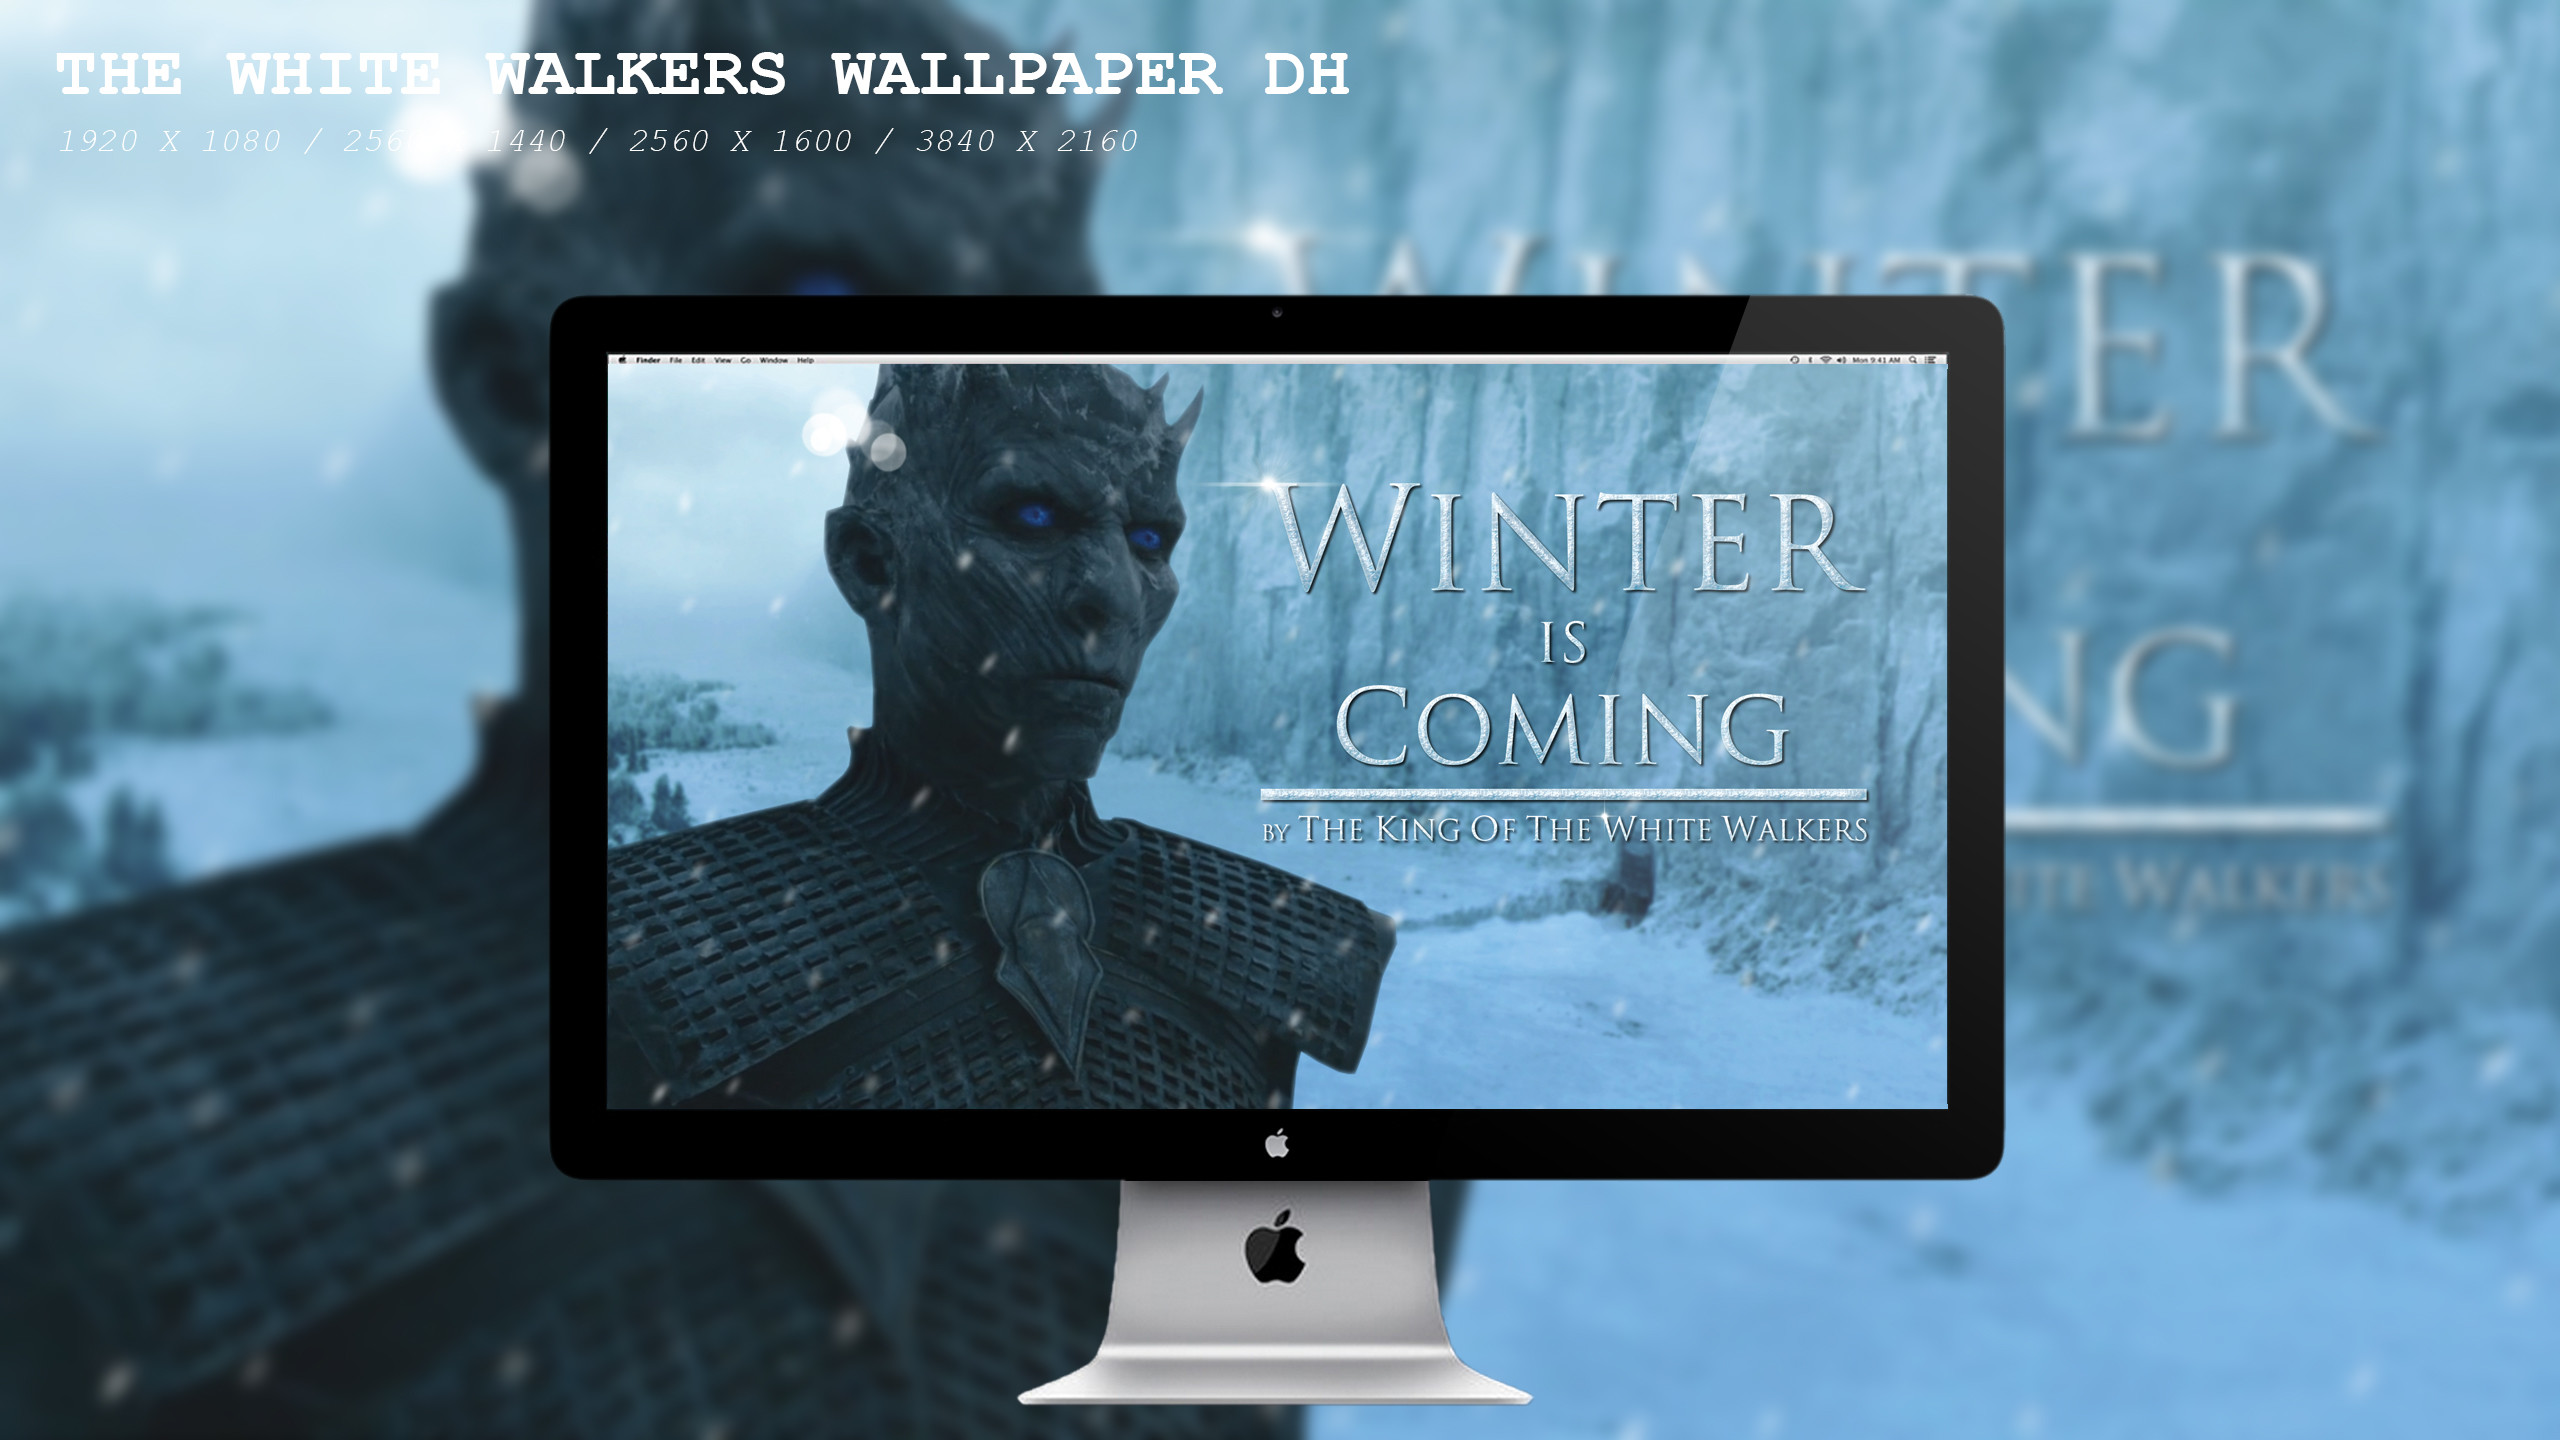 2560x1440 ... The White Walkers wallpaper DH by BeAware8